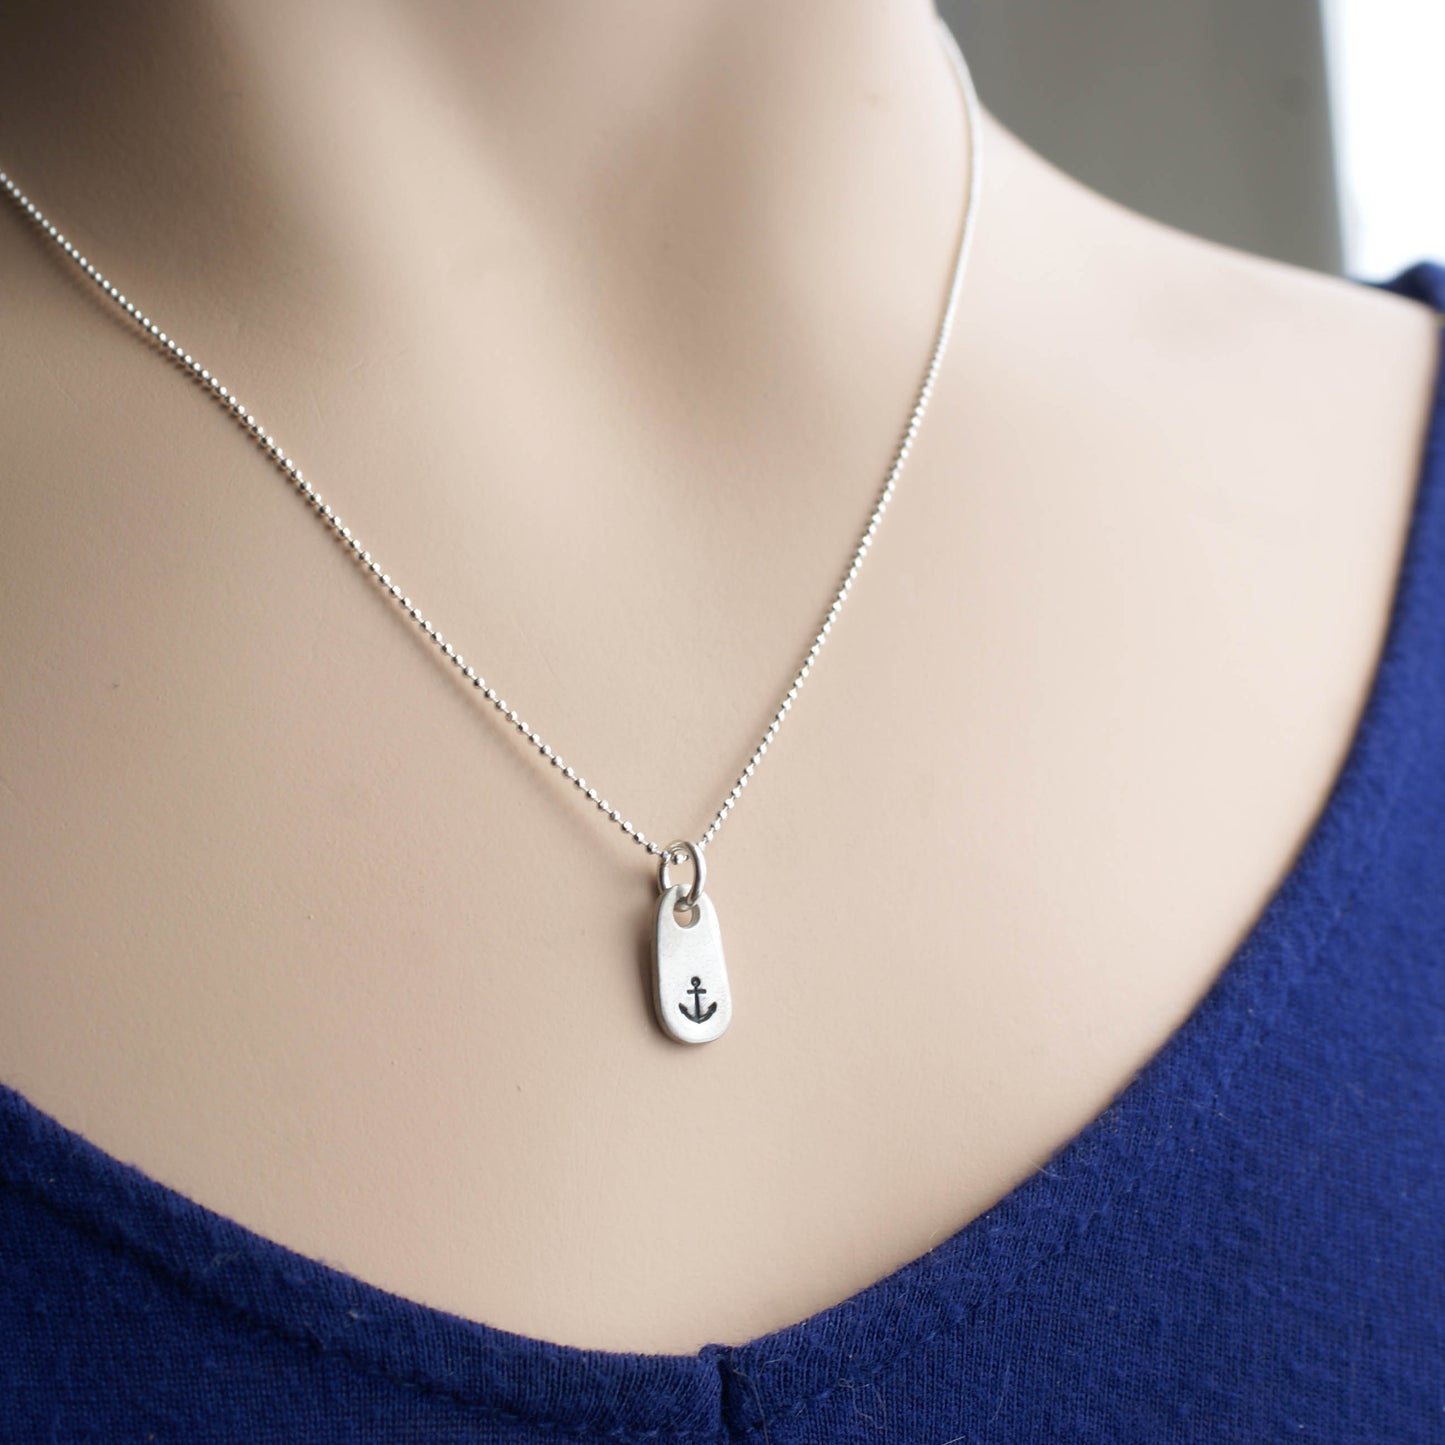 Dainty Handstamped Anchor Necklace in Pewter on woman